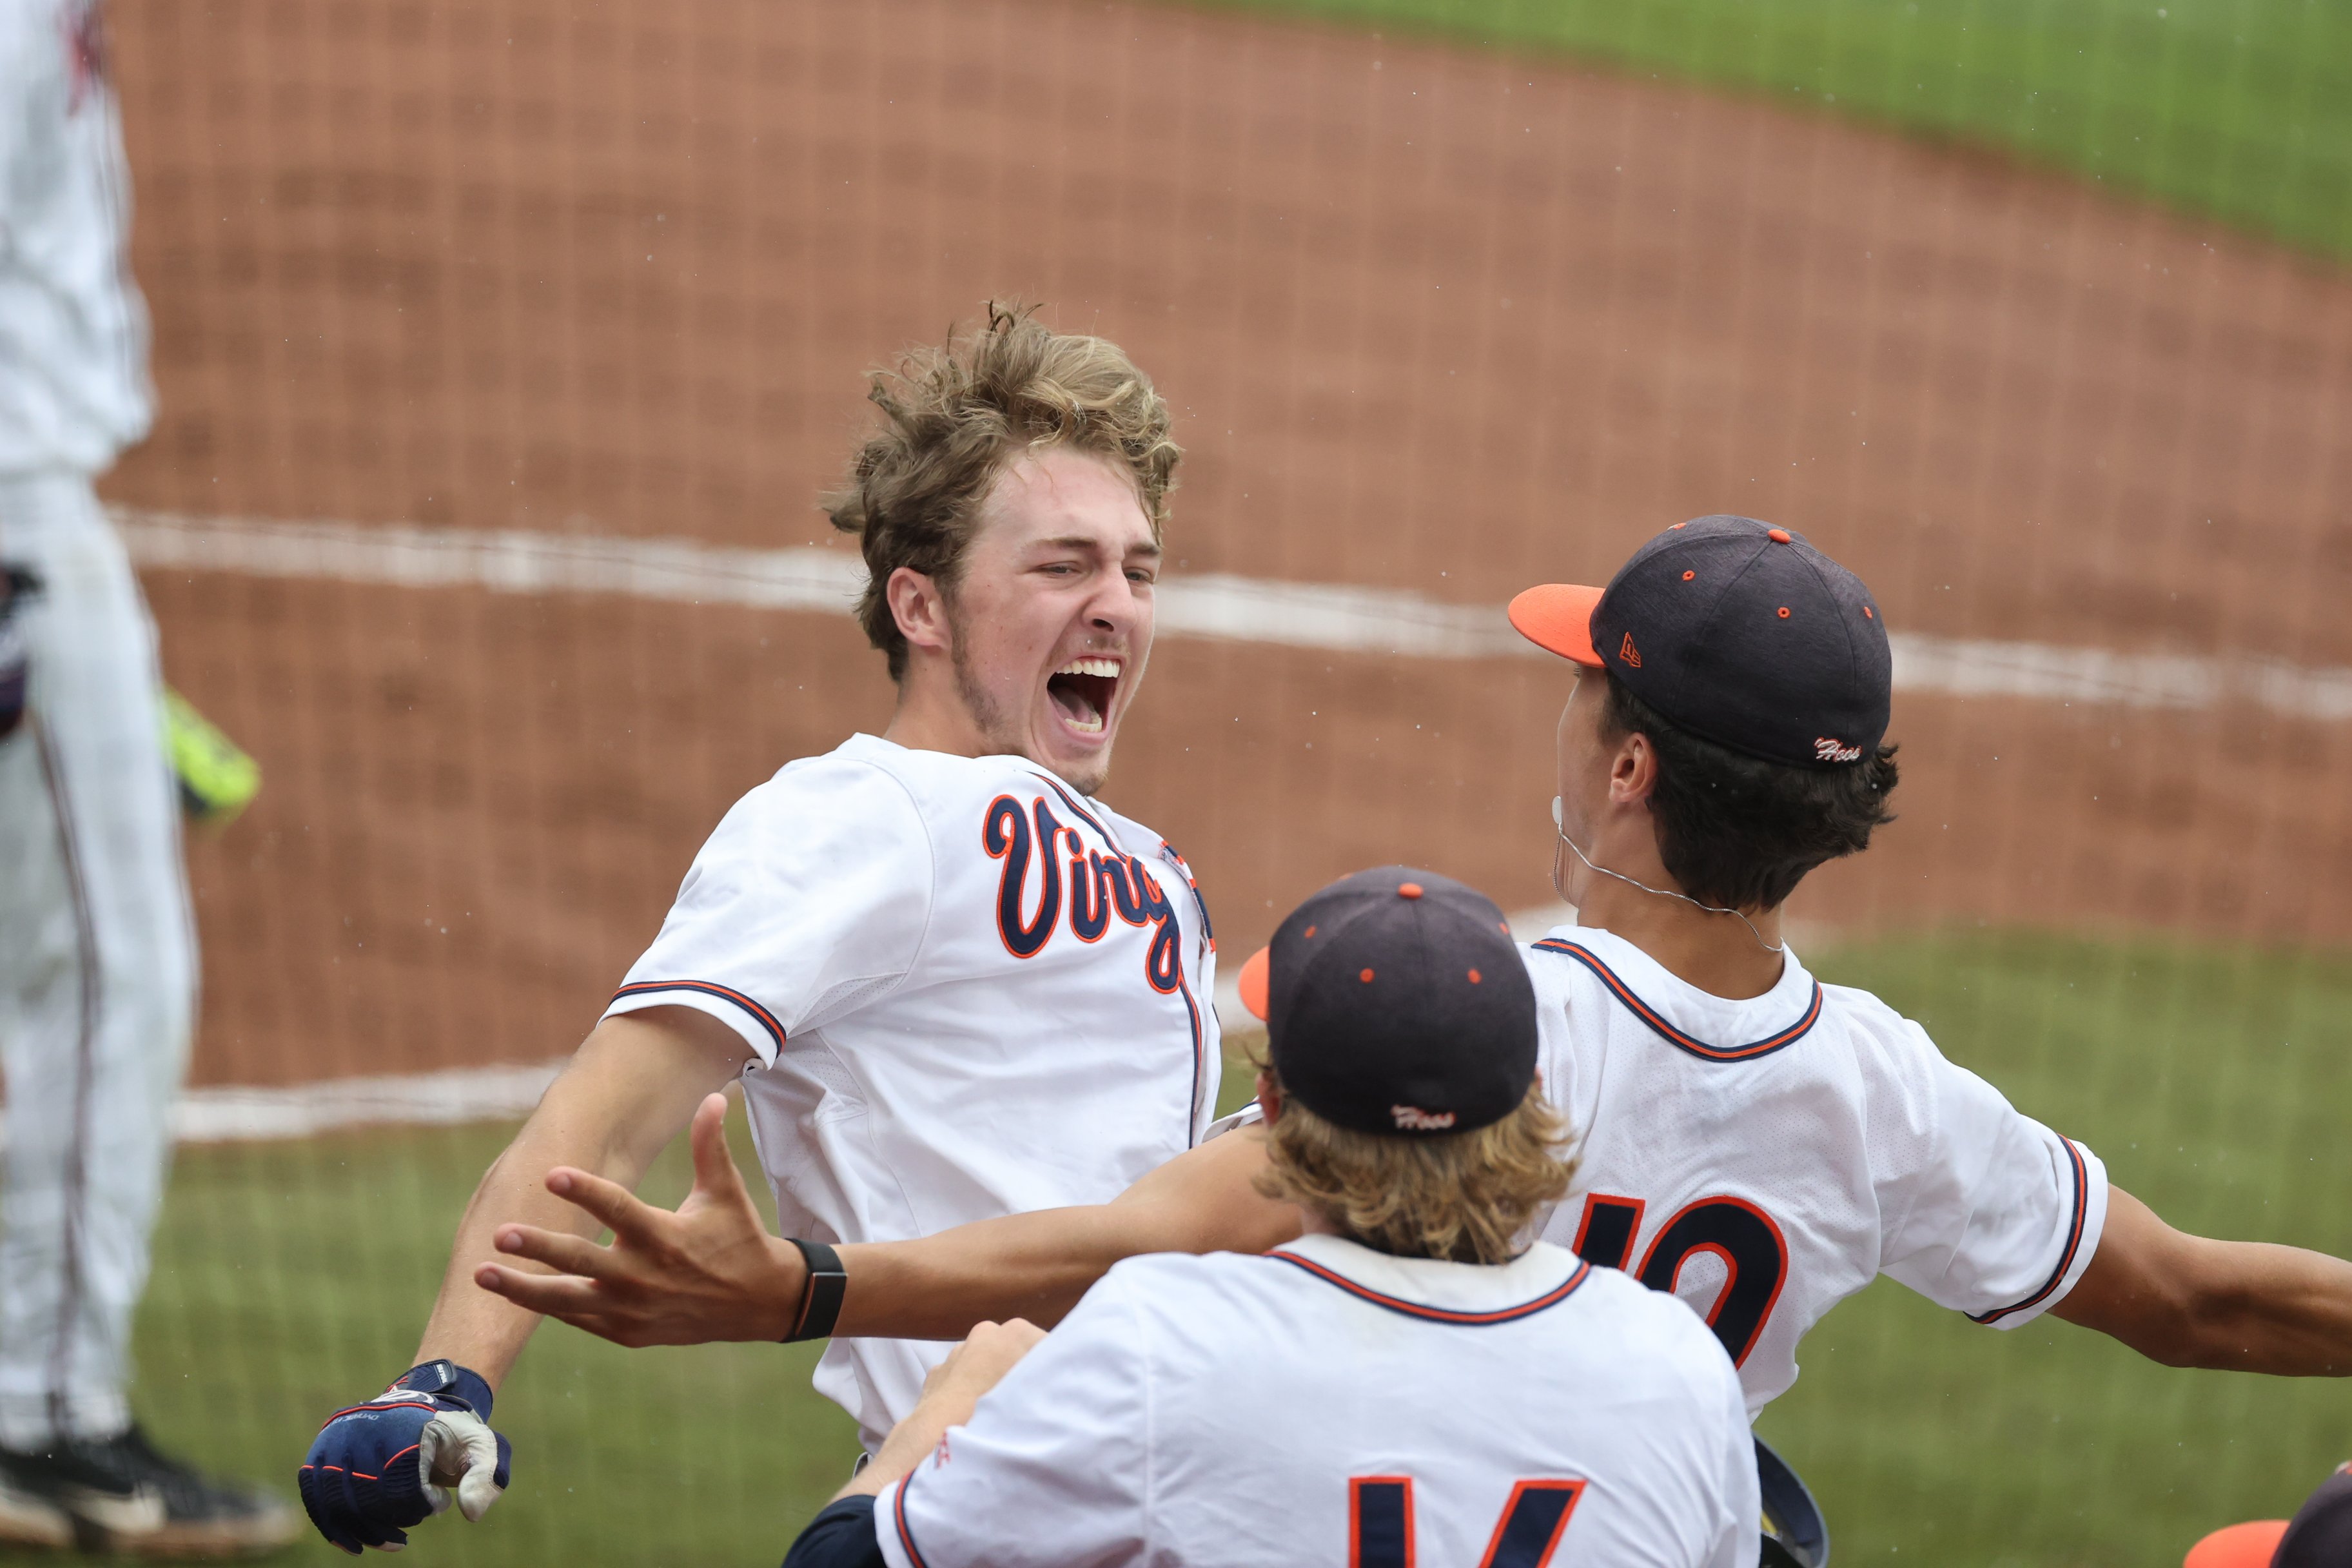 Virginia is headed to the Super Regional round for the seventh time.